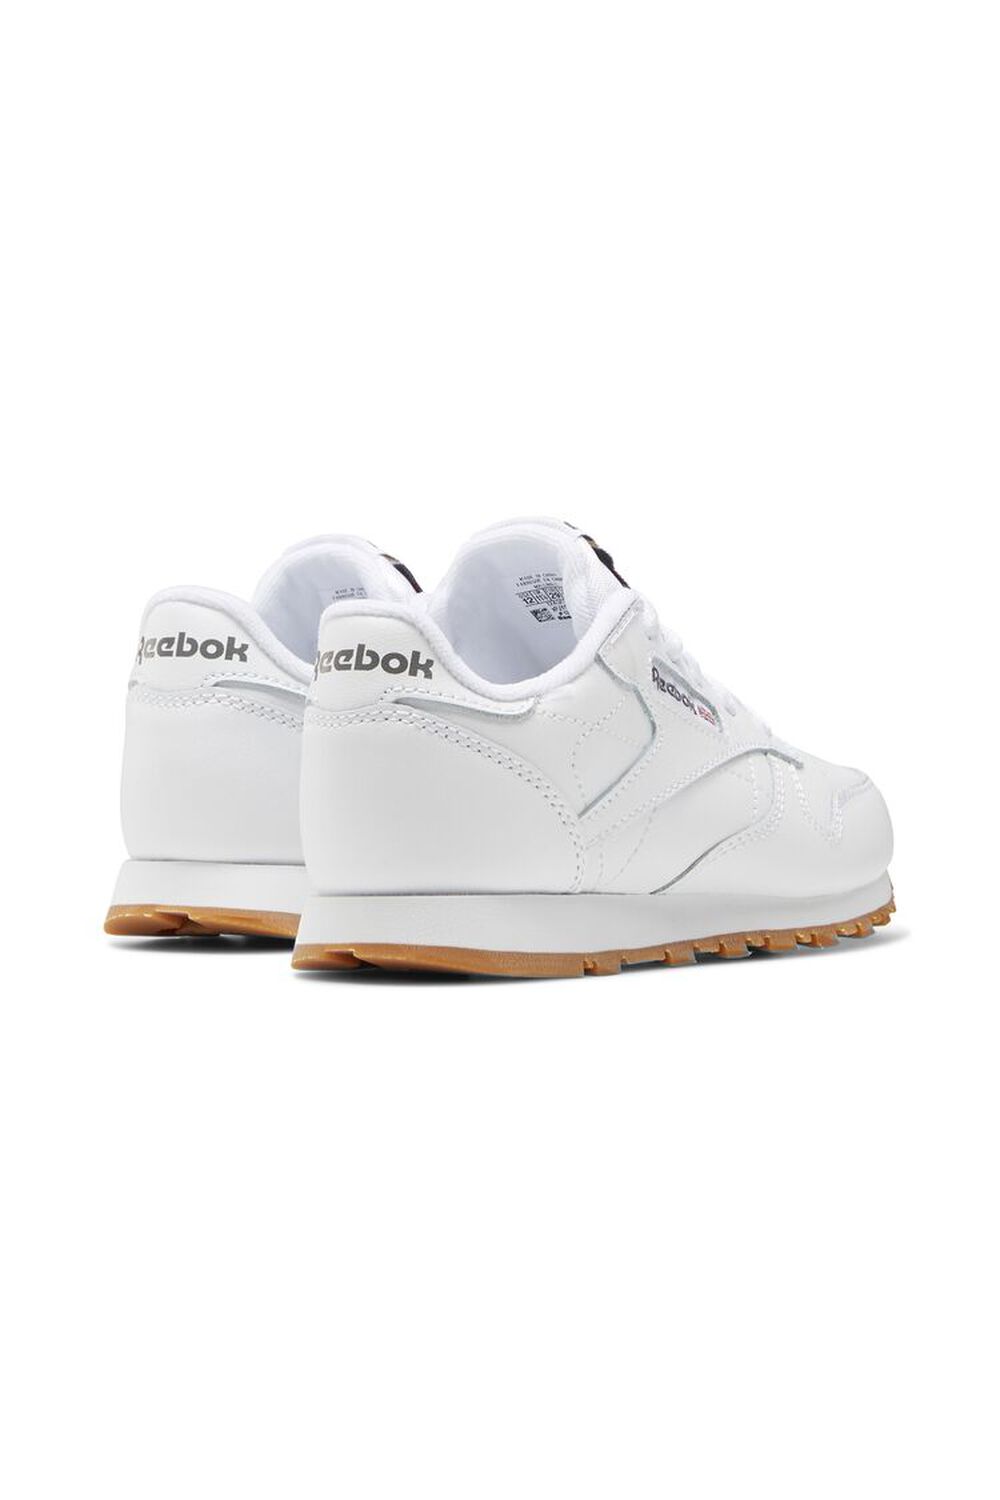 Reebok Classic Leather Shoes (Kids)